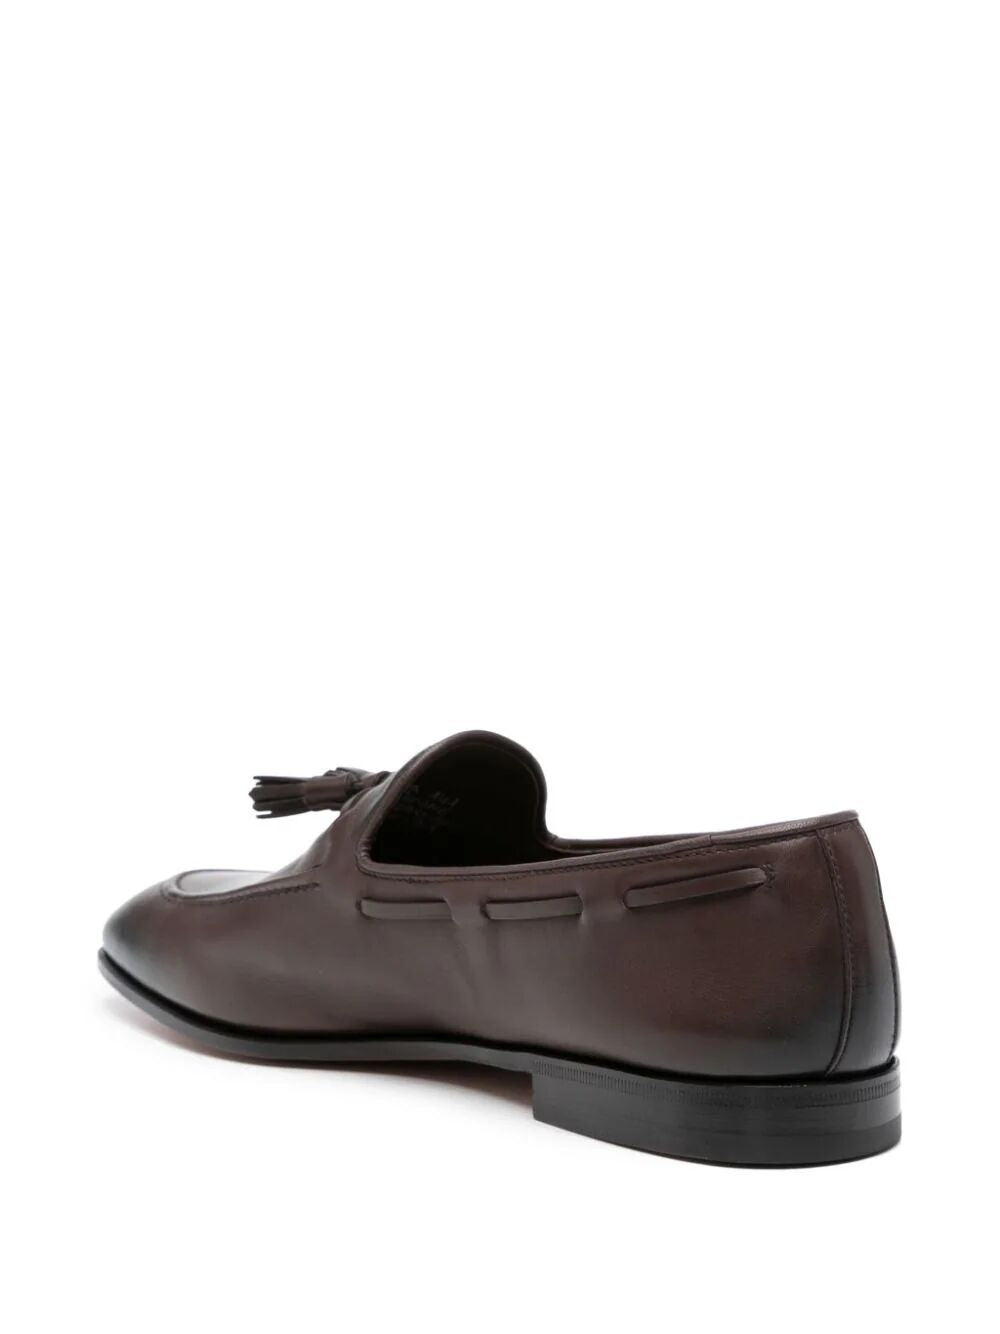 CHURCH'S Modern Tubular Loafer with Classic Tassels and Sleek Design